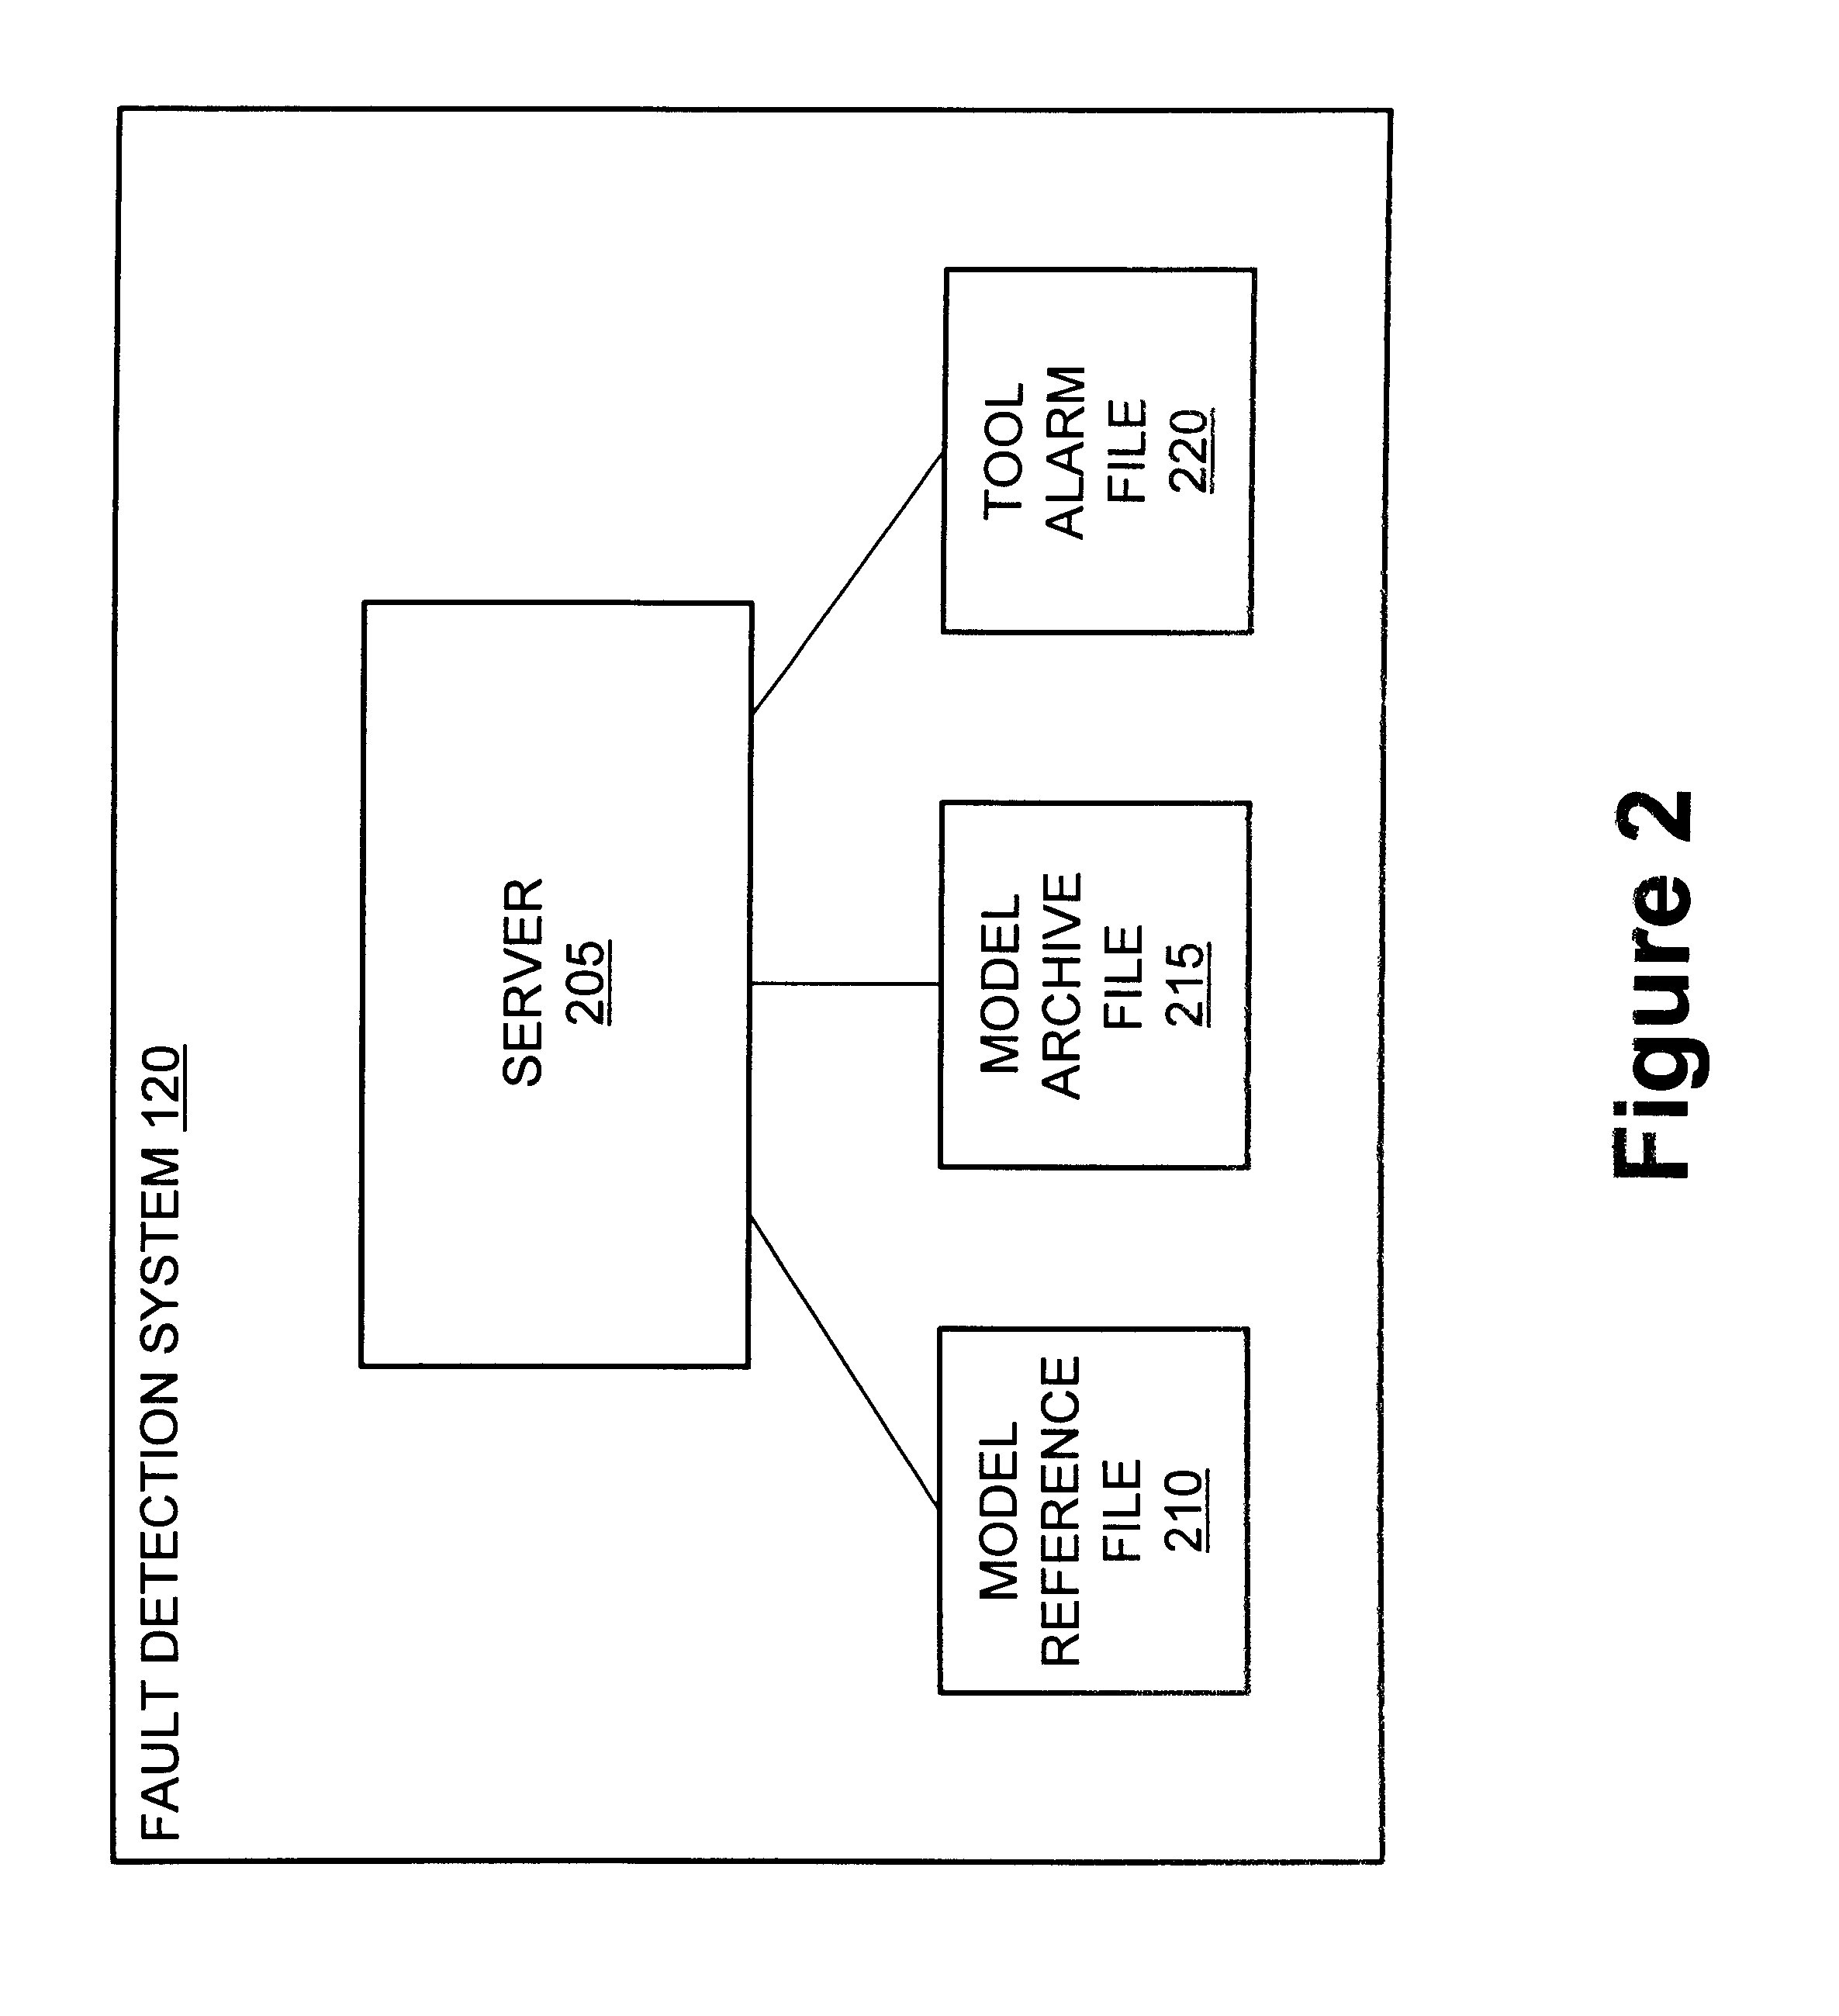 Method and apparatus for fault detection of a processing tool and control thereof using an advanced process control (APC) framework